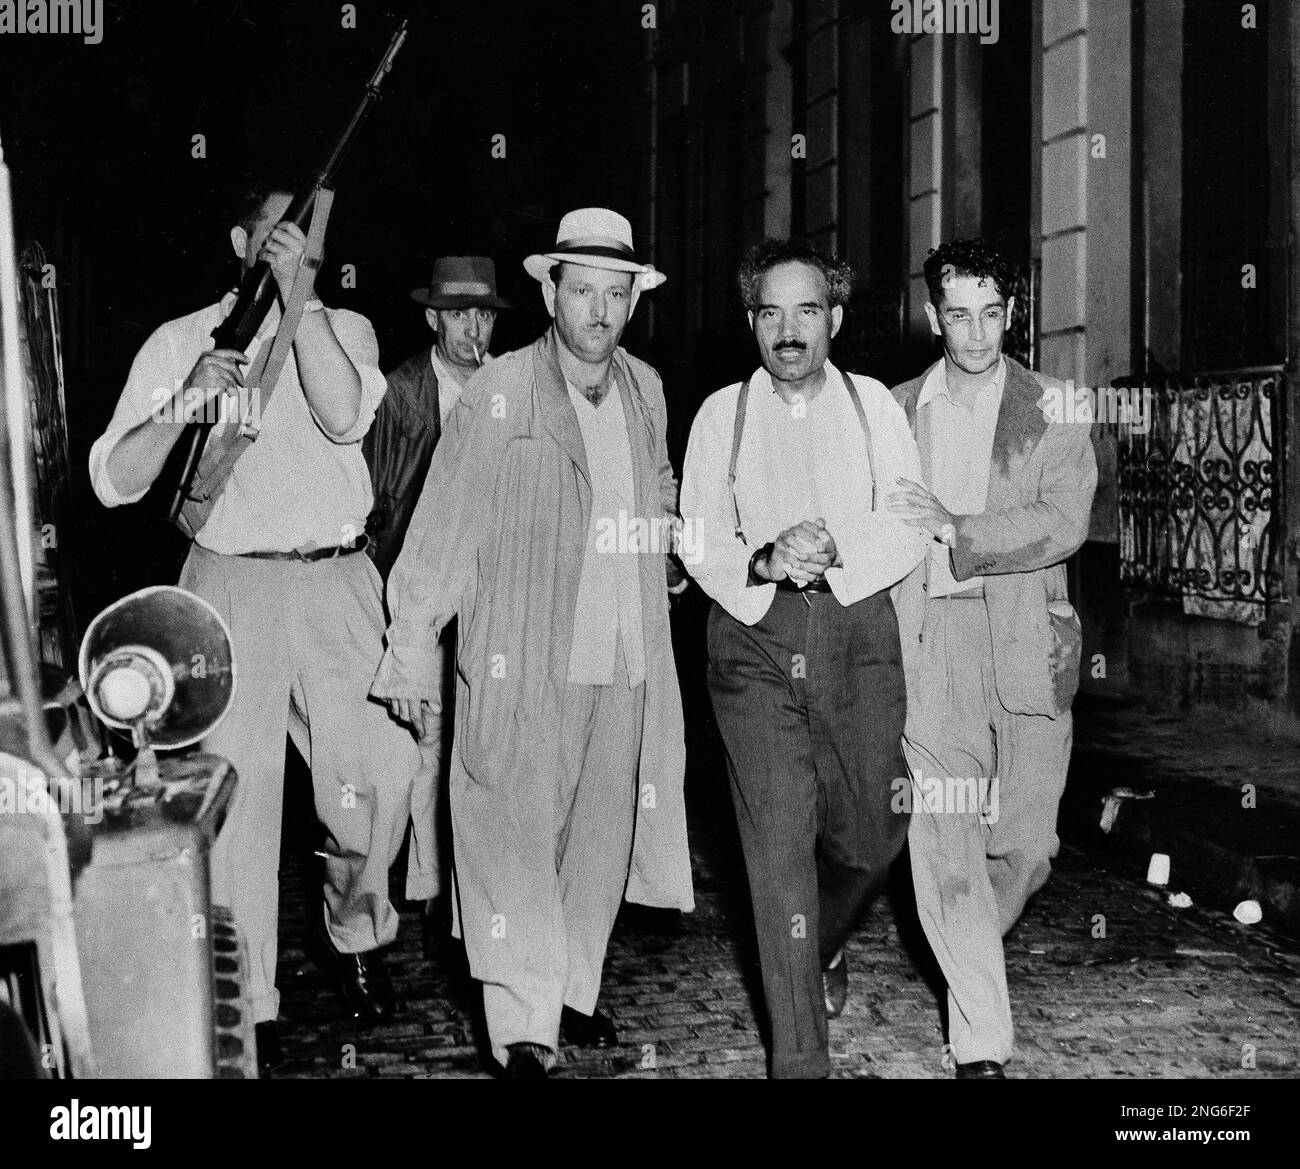 https://c8.alamy.com/compes/2ng6f2f/pedro-albizu-campos-president-of-the-puerto-rican-nationalists-was-routed-from-his-besieged-home-at-san-juan-puerto-rico-nov-2-1950-by-police-using-teargas-he-surrendered-without-a-shot-being-fired-and-was-whisked-to-headquarters-for-questioning-hours-after-the-washington-attempt-on-the-life-of-president-truman-other-top-leaders-of-the-nationalist-and-communist-parties-were-taken-in-a-widespread-roundup-campos-headed-a-nationalist-uprising-in-puerto-rico-which-started-oct-30-ap-photo-2ng6f2f.jpg